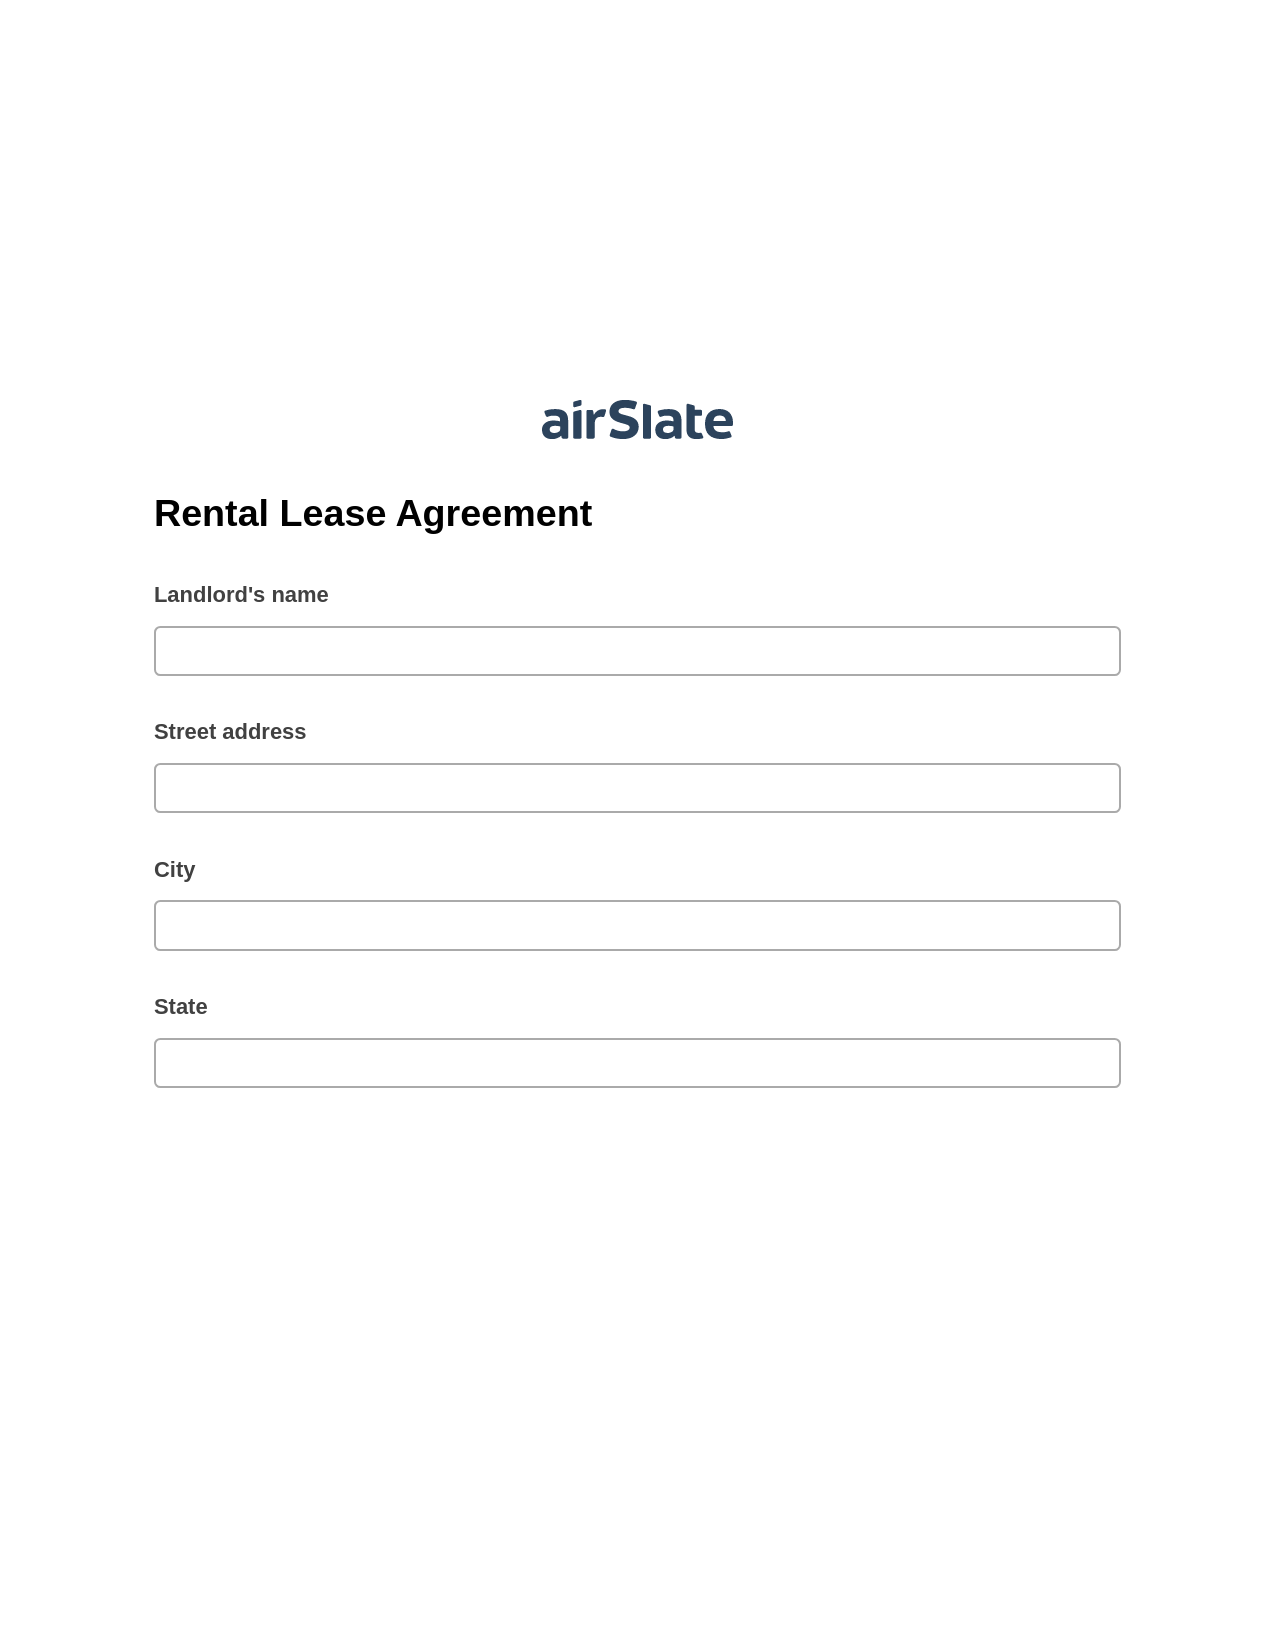 Multirole Rental Lease Agreement Pre-fill from Excel Spreadsheet Dropdown Options Bot, Remove Tags From Slate Bot, Export to Excel 365 Bot